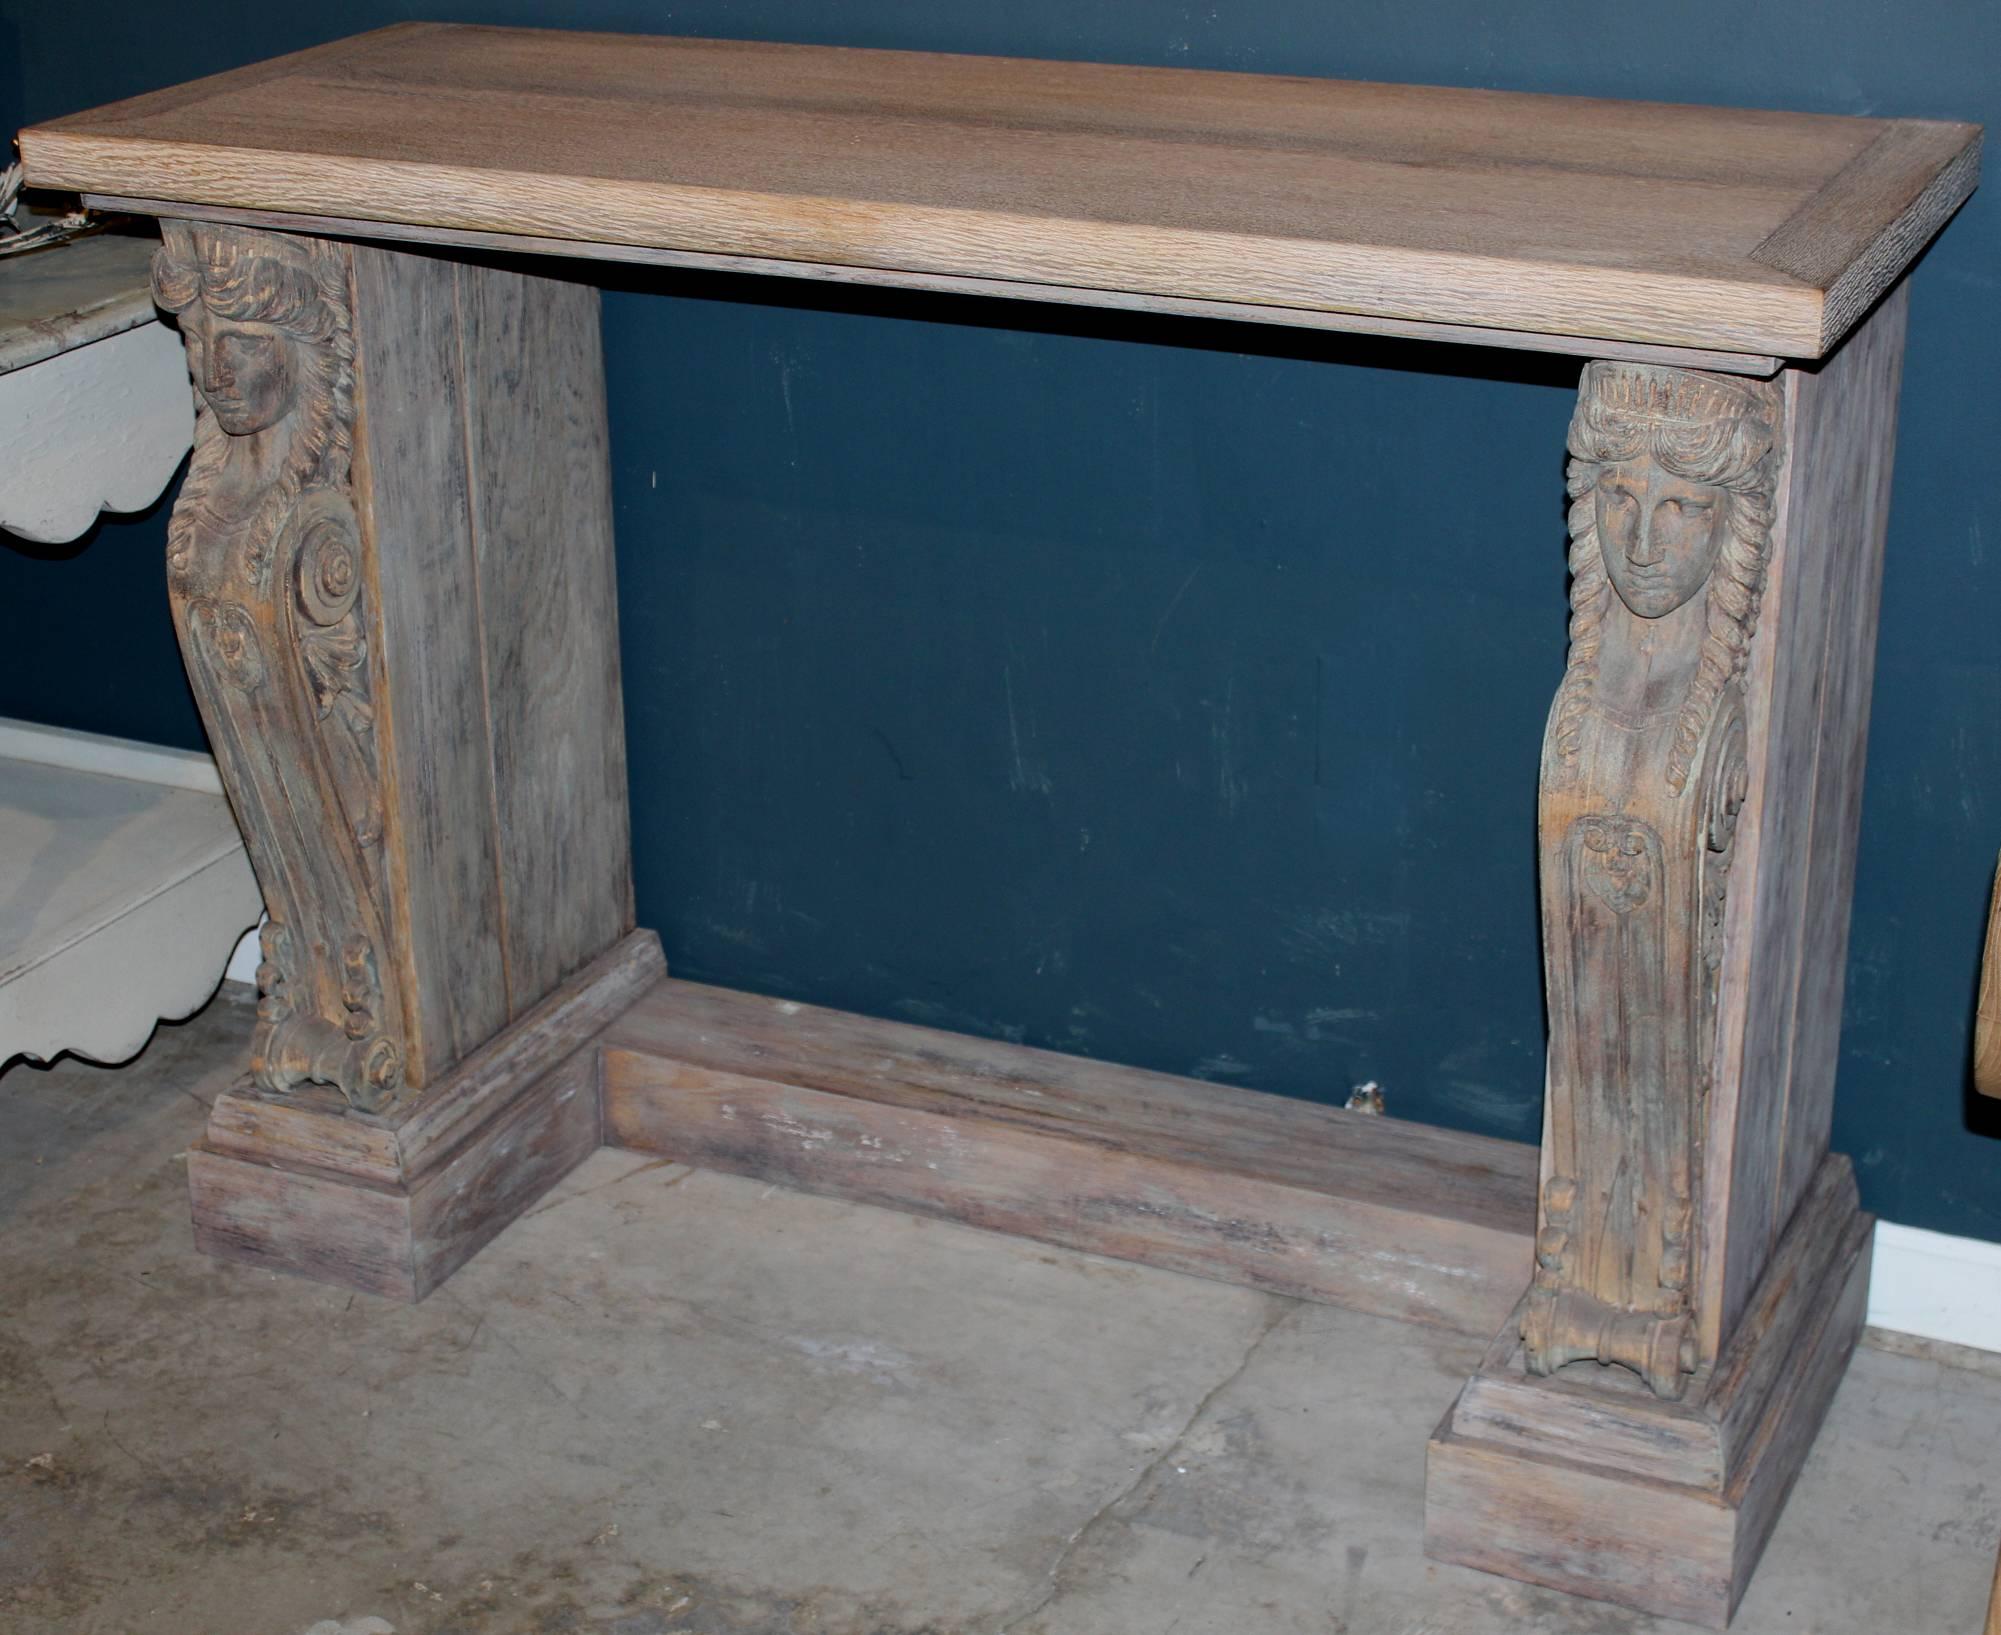 An exceptional wood French Empire style console constructed around two beautiful 19th century, Continental caryatid figures and scroll front carved elements, with custom rectangular top and fitted U-shaped base. Great surface.